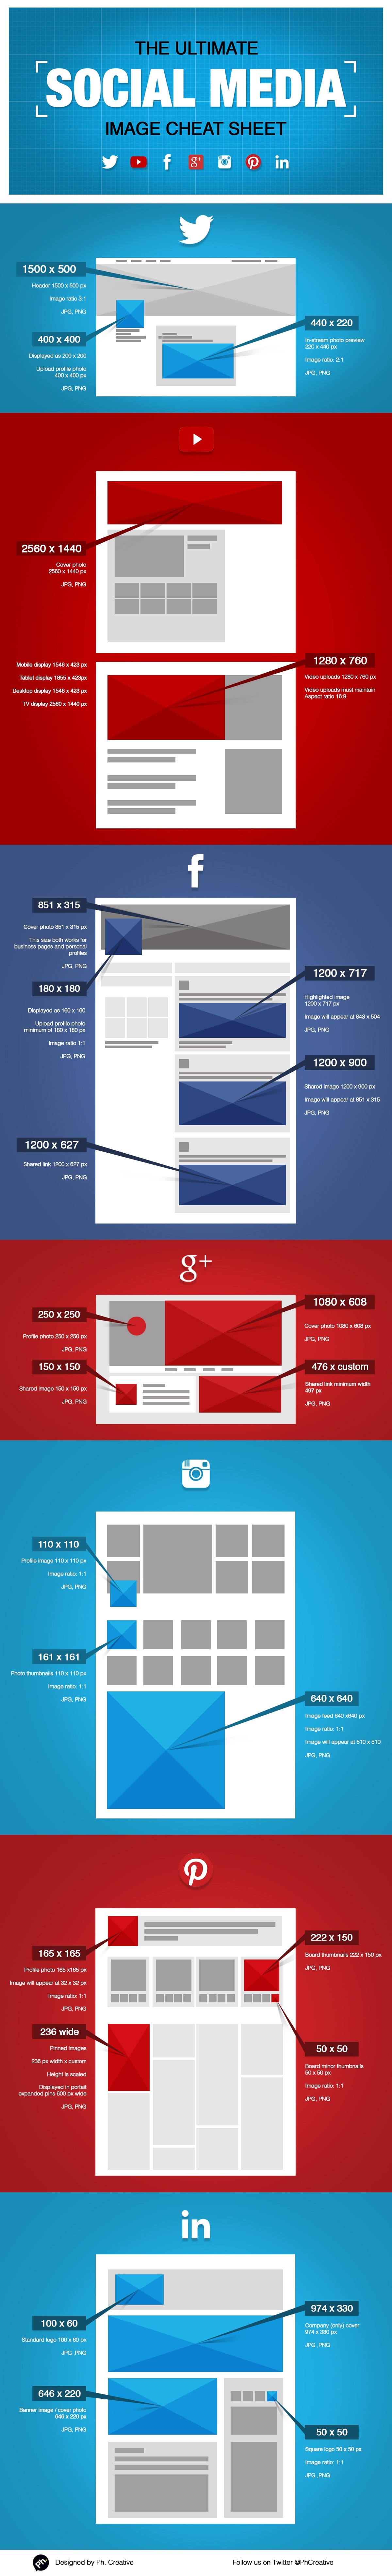 2015 Social Media Image Sizes Guide - Infographic